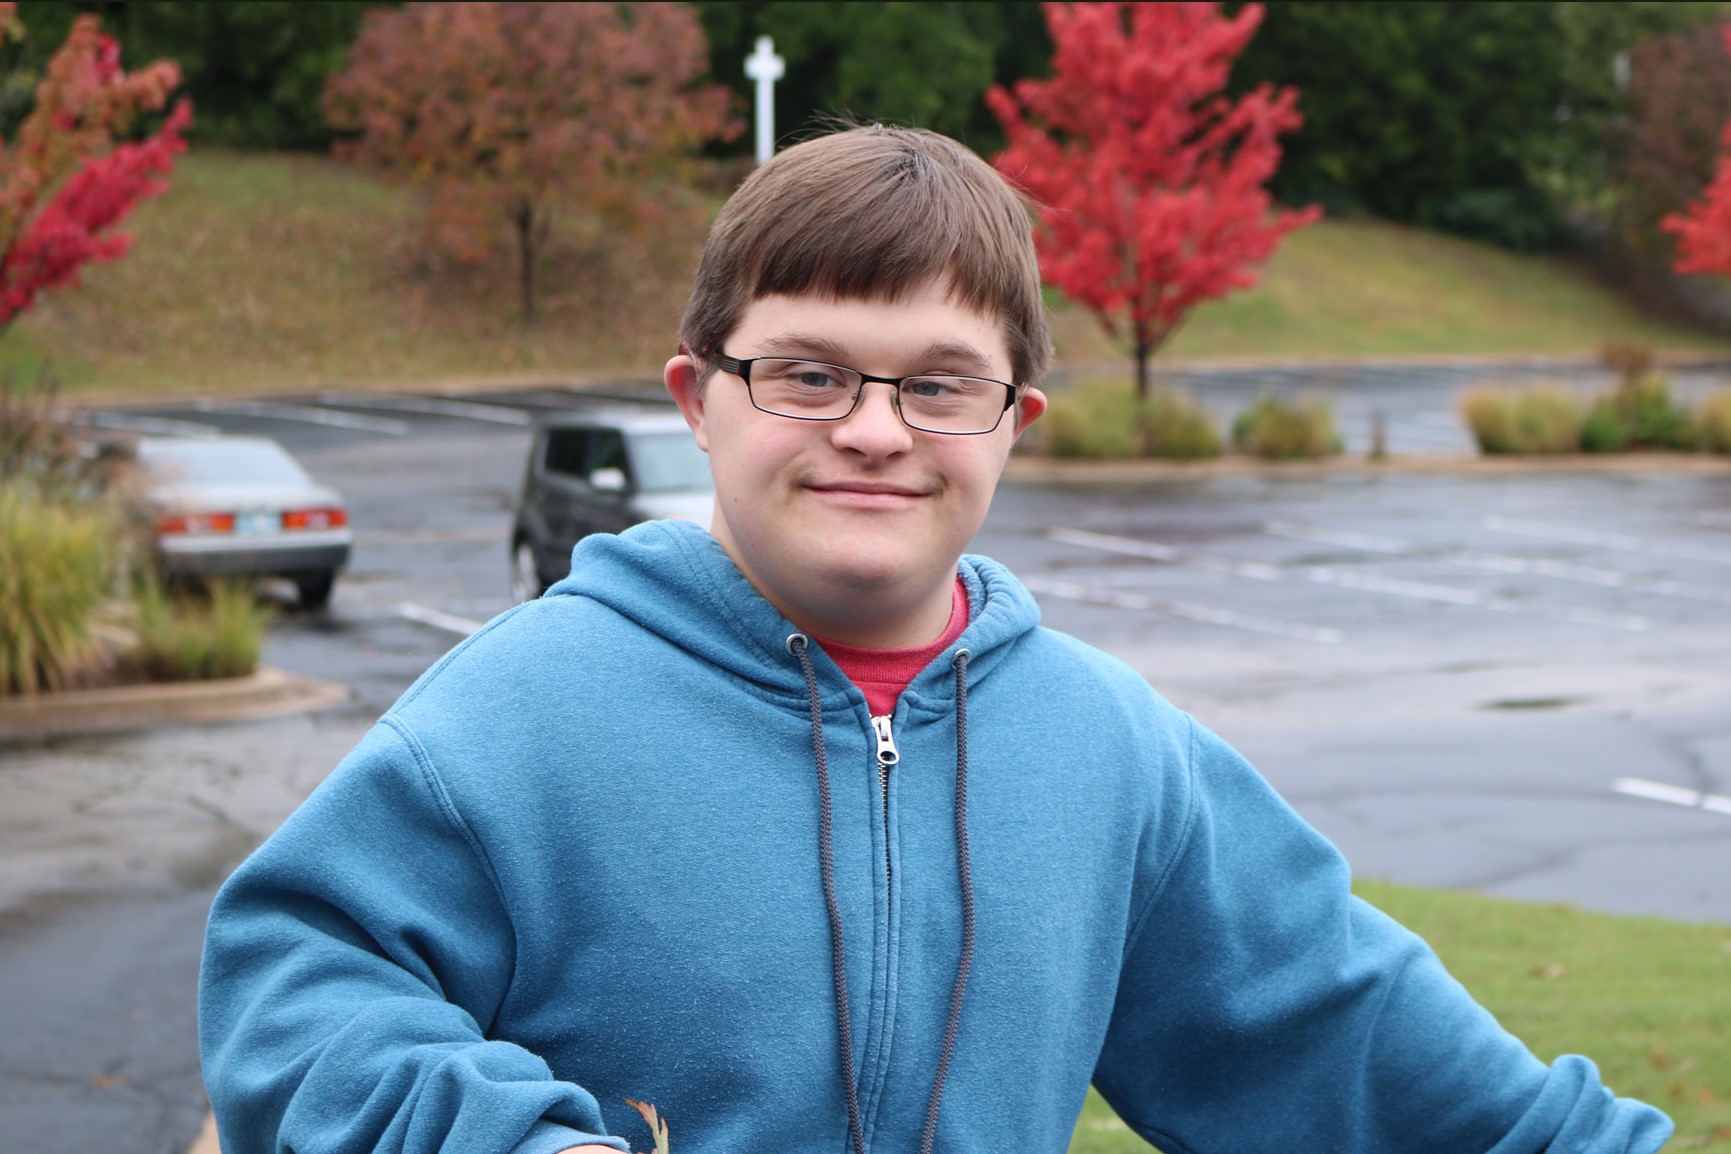 Male student Ethan, outside, wearing a light blue zip up hoodie.